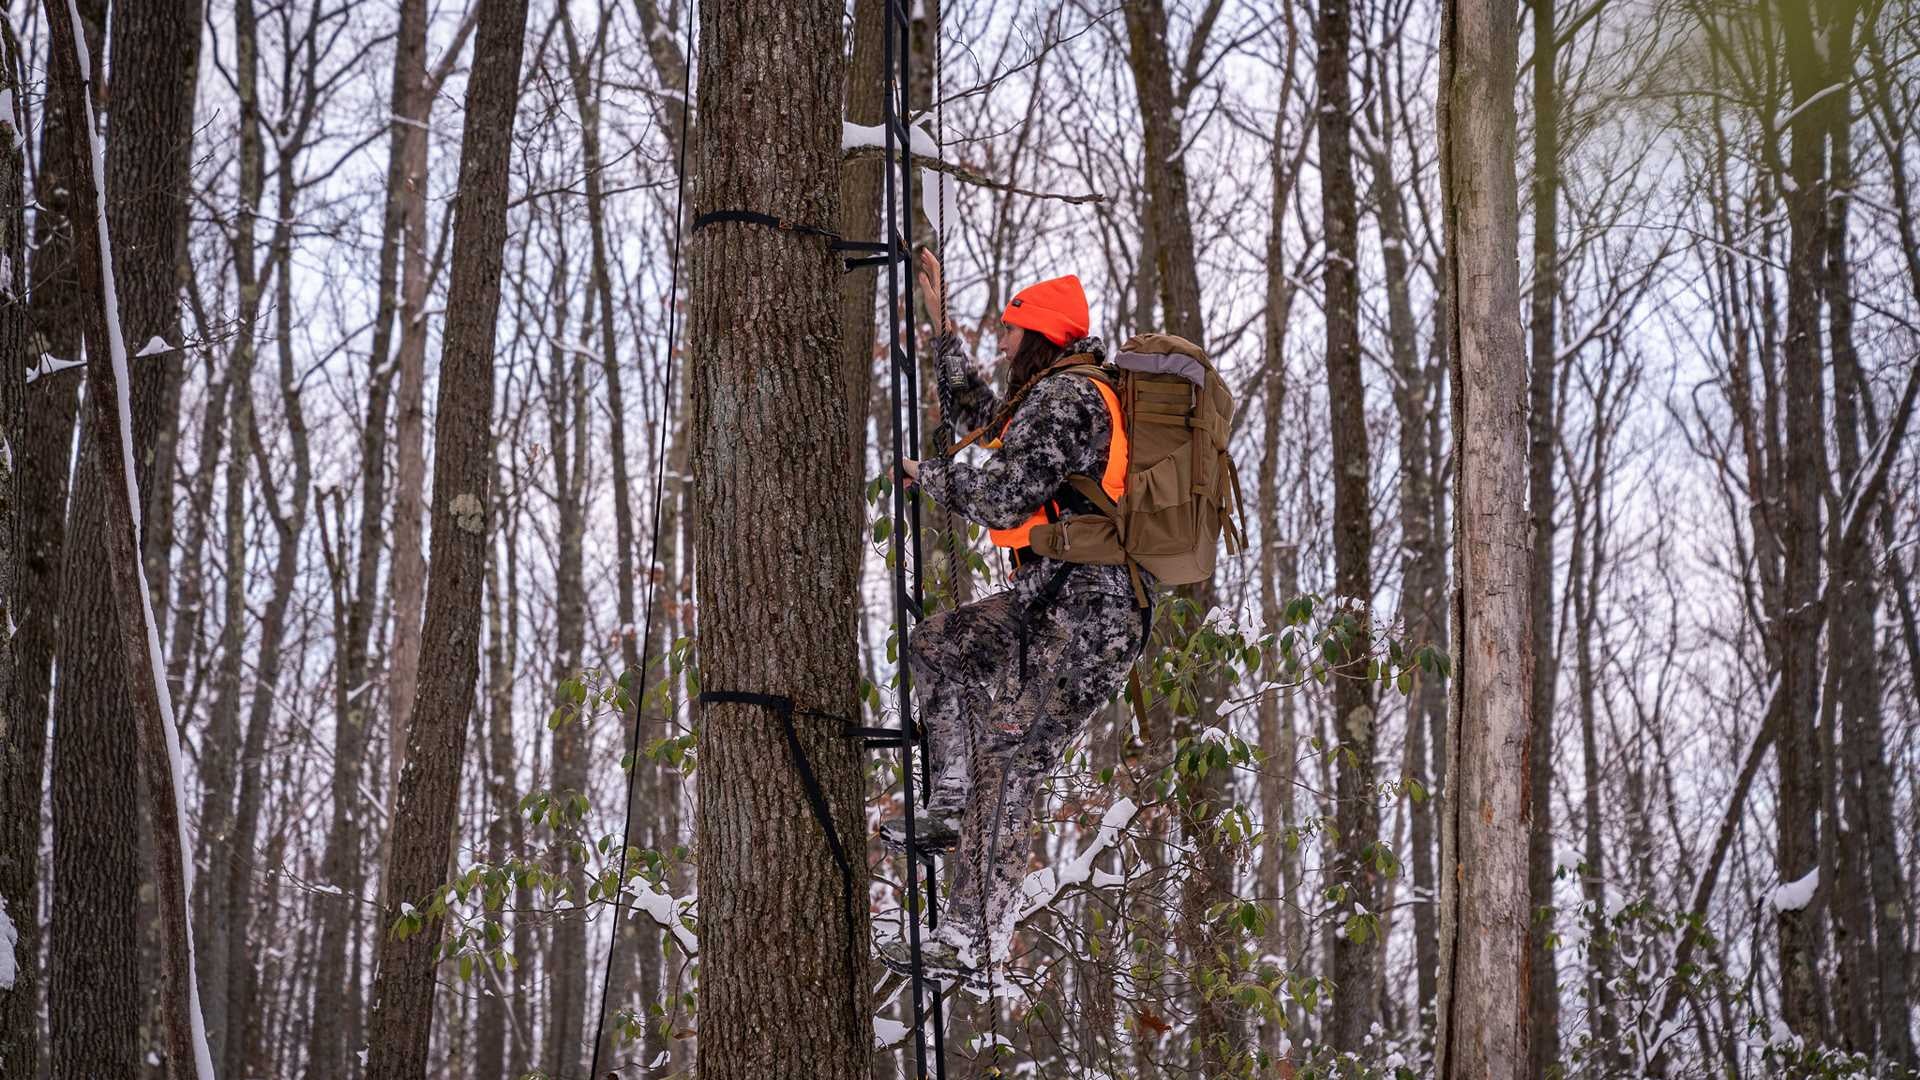 Saddle Hunting vs Stationary Tree Stands